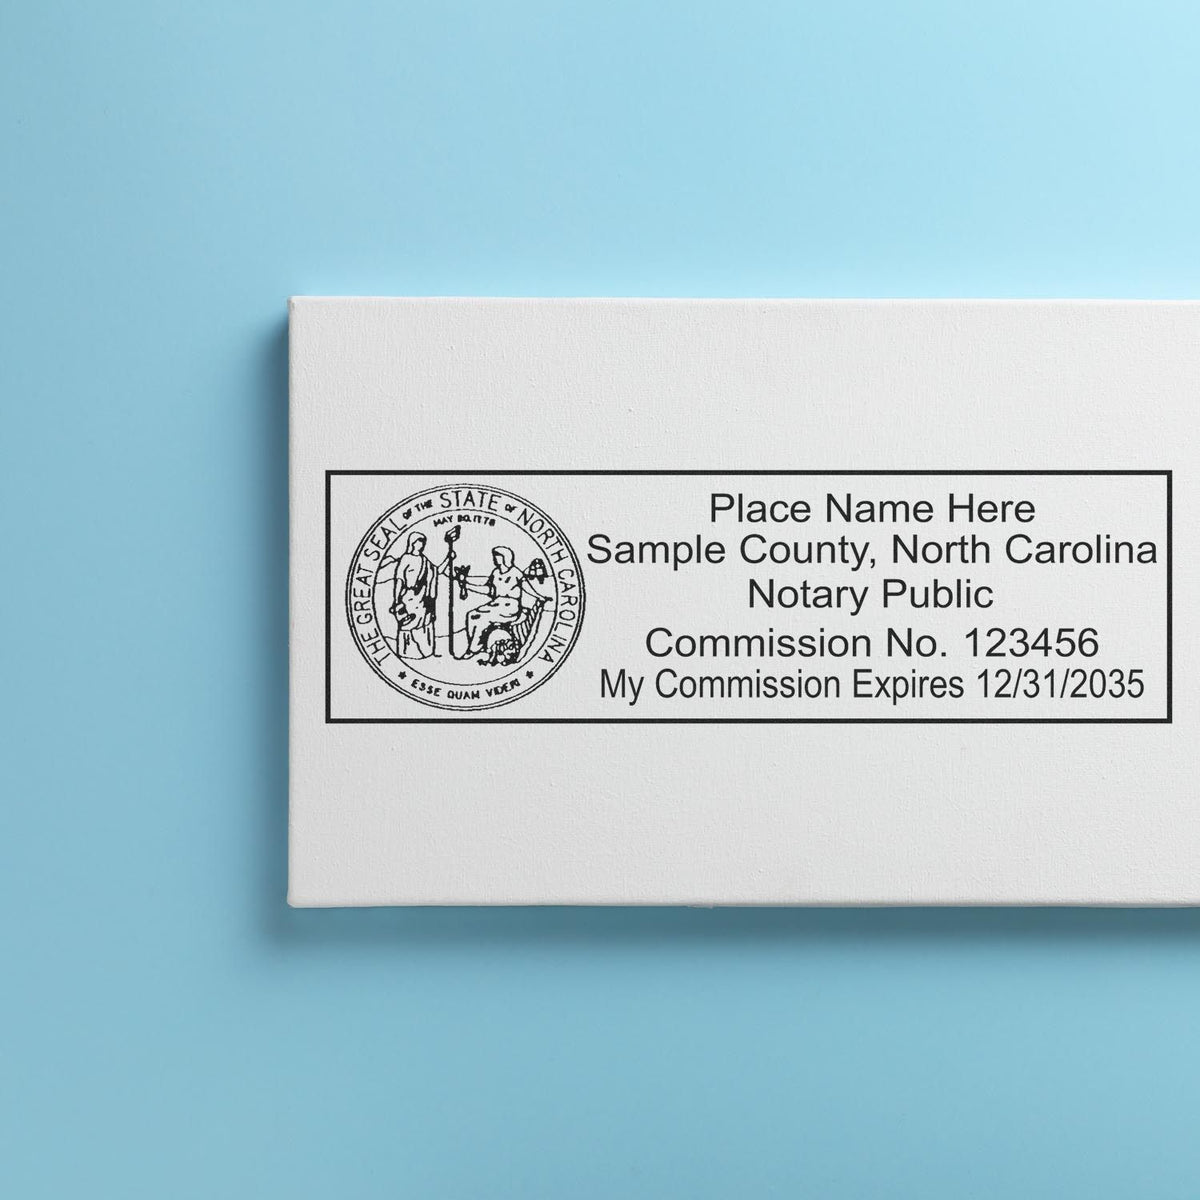 Another Example of a stamped impression of the Self-Inking State Seal North Carolina Notary Stamp on a piece of office paper.